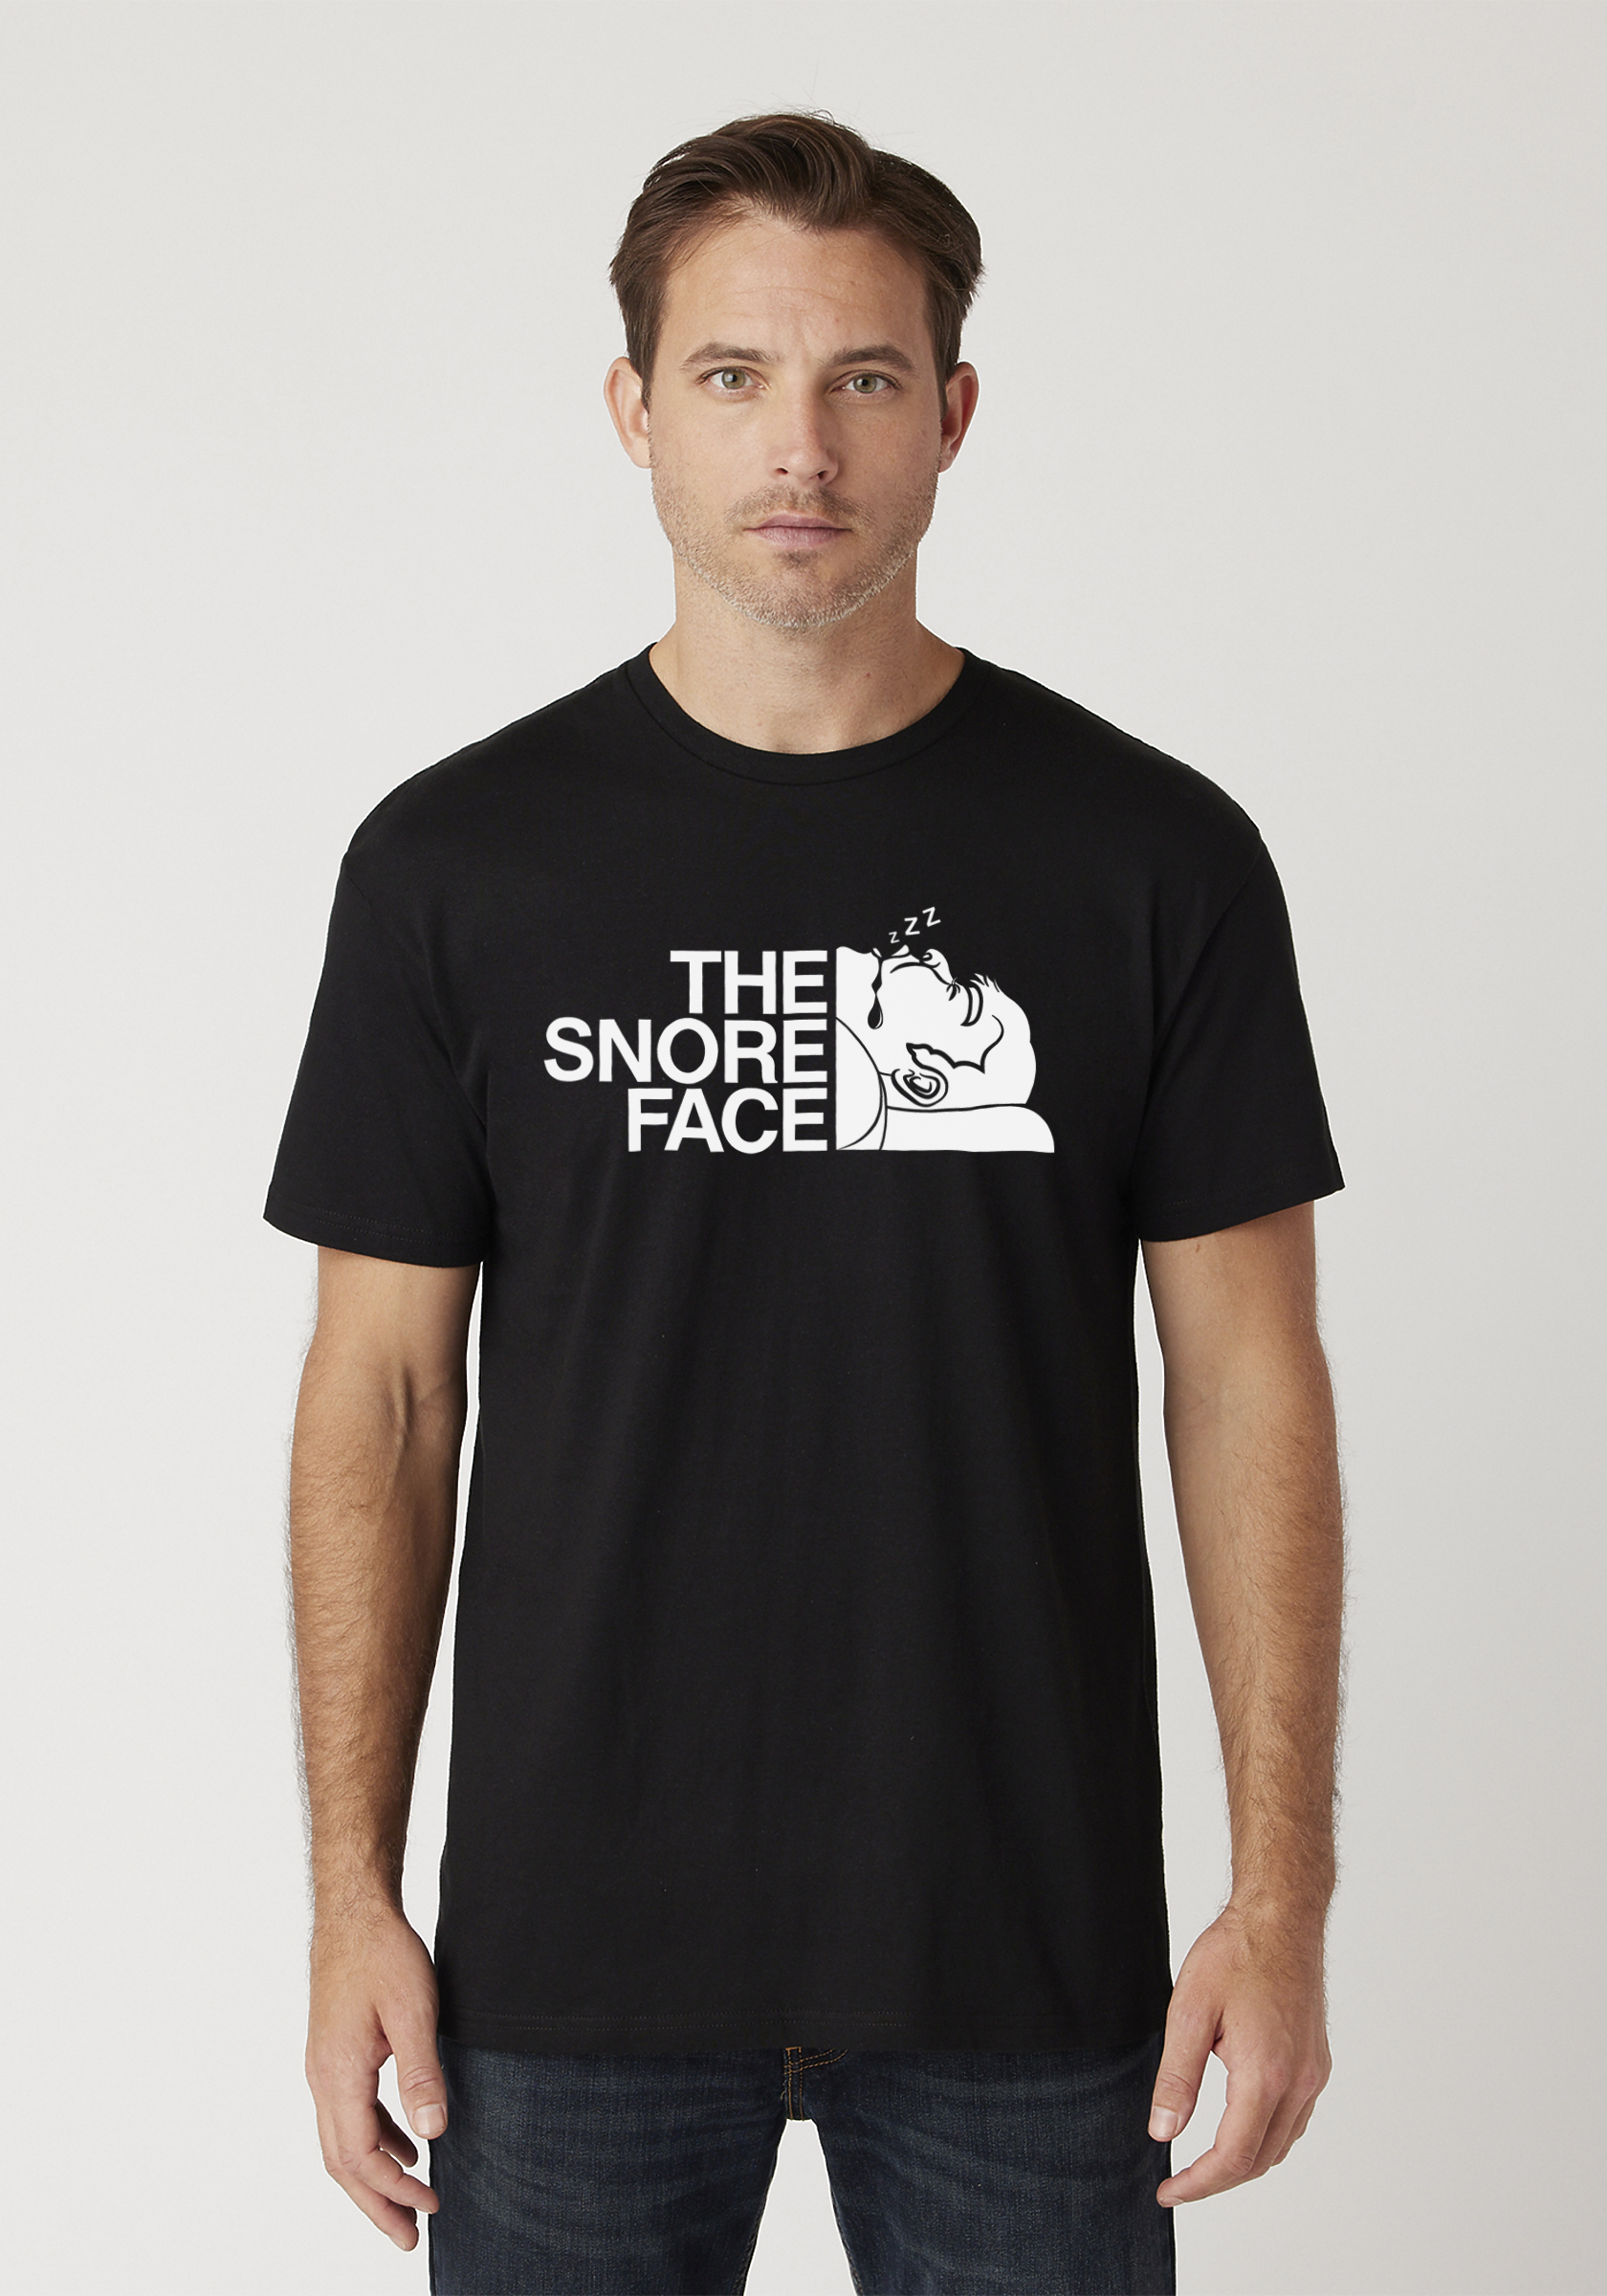 the north face funny t shirt, brand parody t shirt, funny t-shirts, parody t-shirts